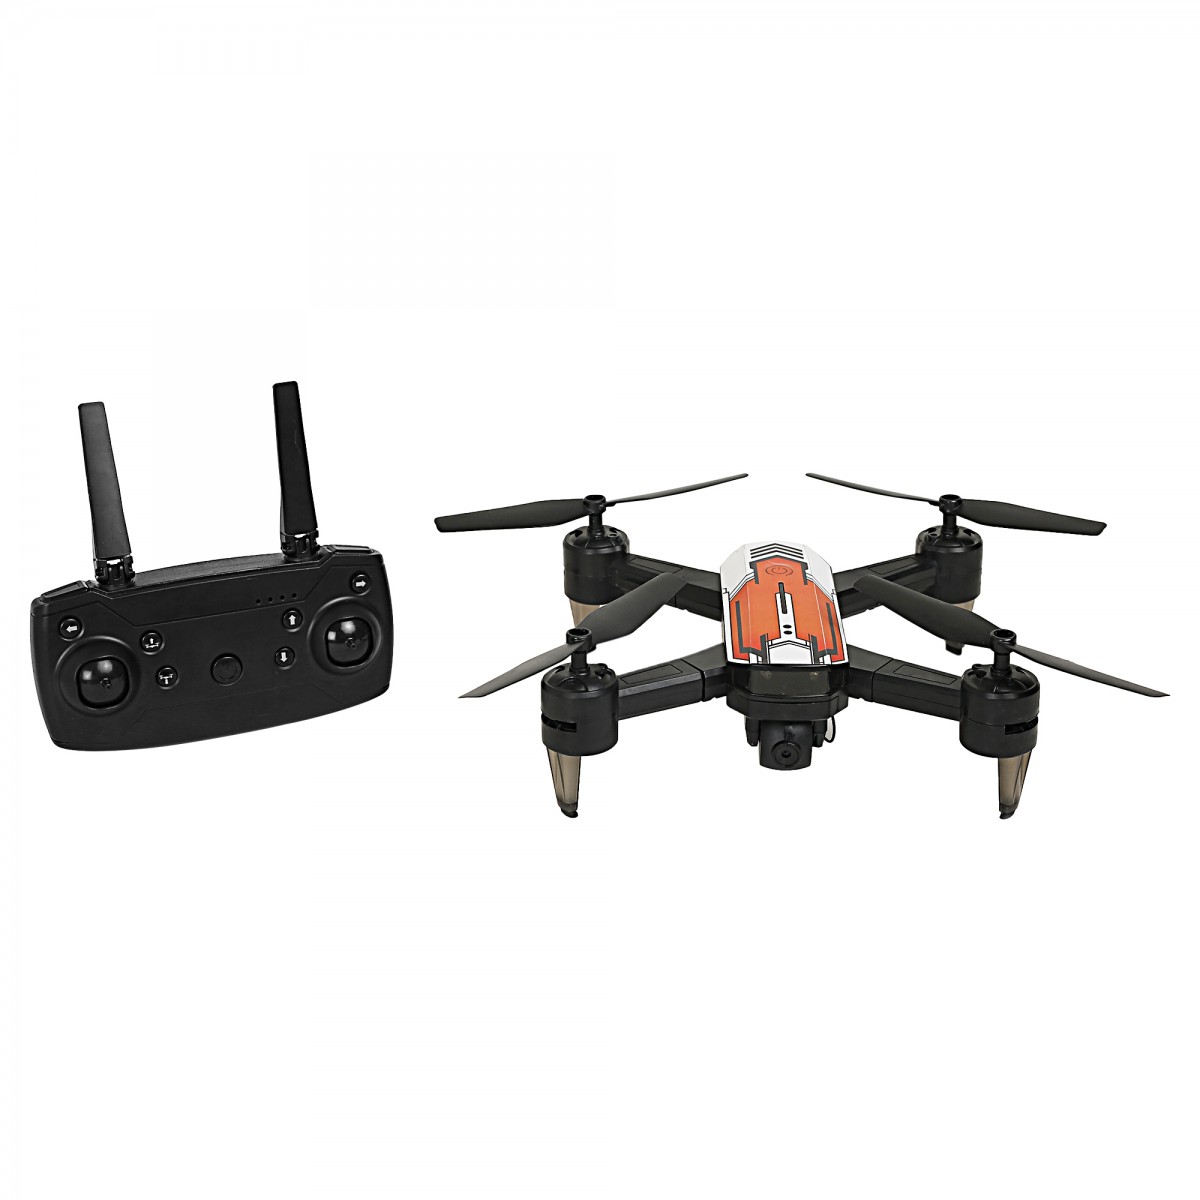 Electrobotic Dual Camera Drone With Altitude Hold Position Holding 720P Camera Drone For Kids Multicolor 14Y+